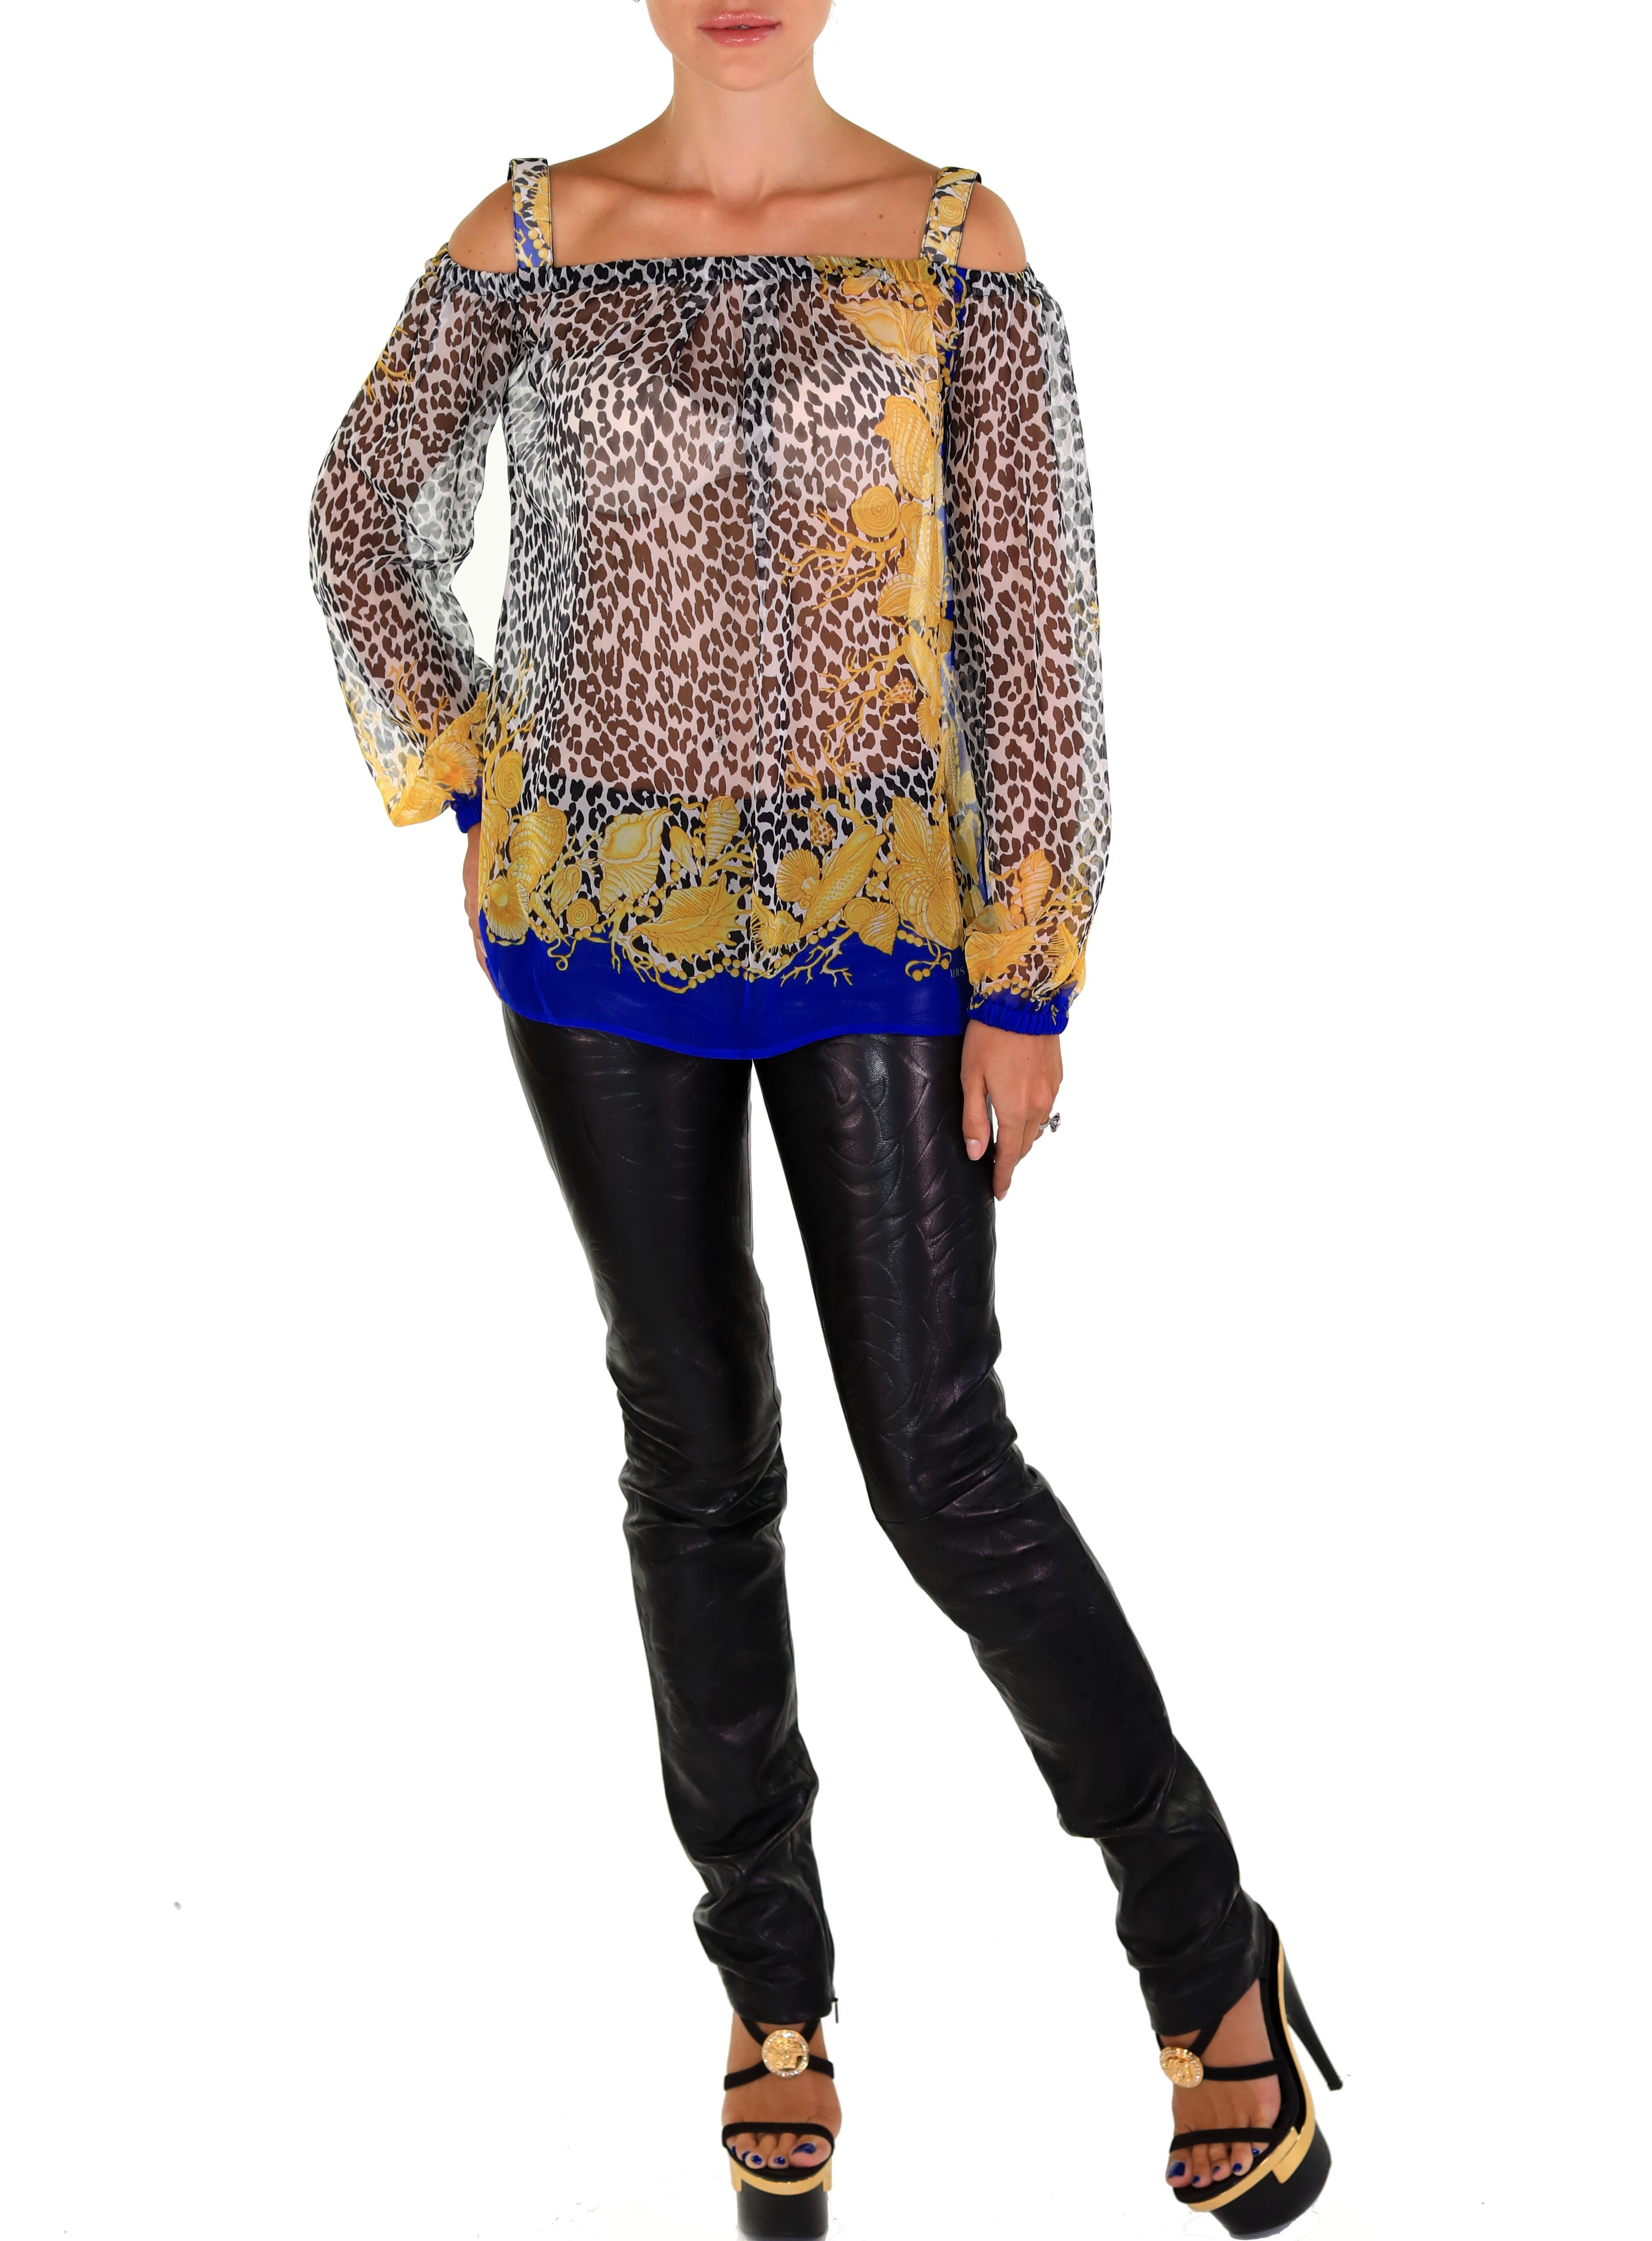 VERSACE 

Off shoulder long sleeve top

Animal and seashell print

100% Chiffon Silk

IT Size  38 - US 4

Made in Italy

New, with tags.

Shown with Versace leather pants, Versace platform shoes and Roberto Cavalli necklace. 

All listed separately